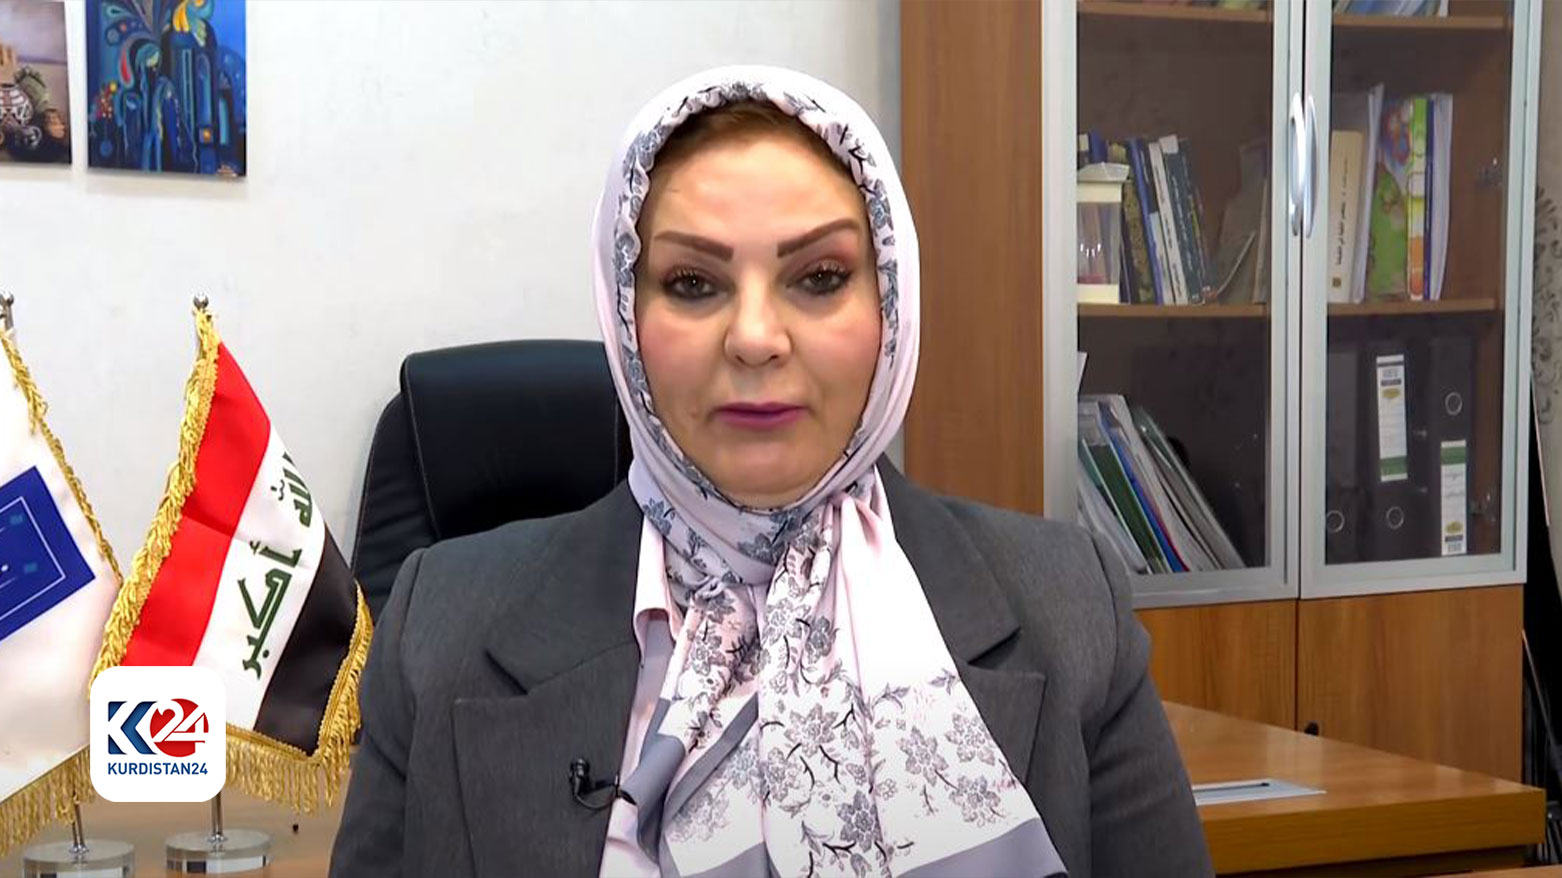 The Iraqi Independent High Electoral Commission (IHEC) spokesperson Joumana Ghallay in an interview with Kurdistan 24 on Monday. (Photo: Kurdistan24)